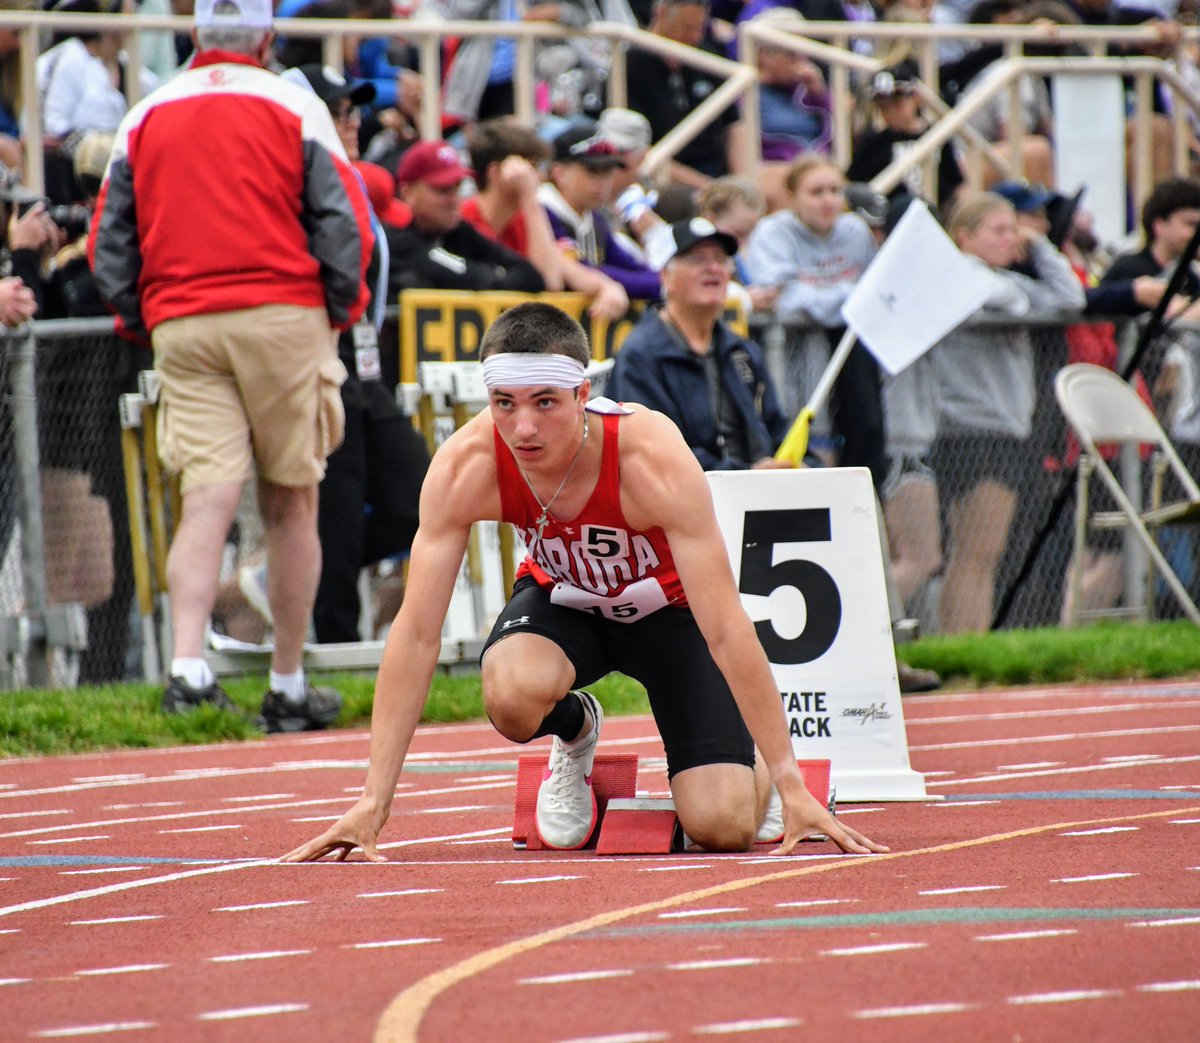 Lucas Gautier ran a 51.70 after a long weather delay in the 400 dash final. #nebpreps